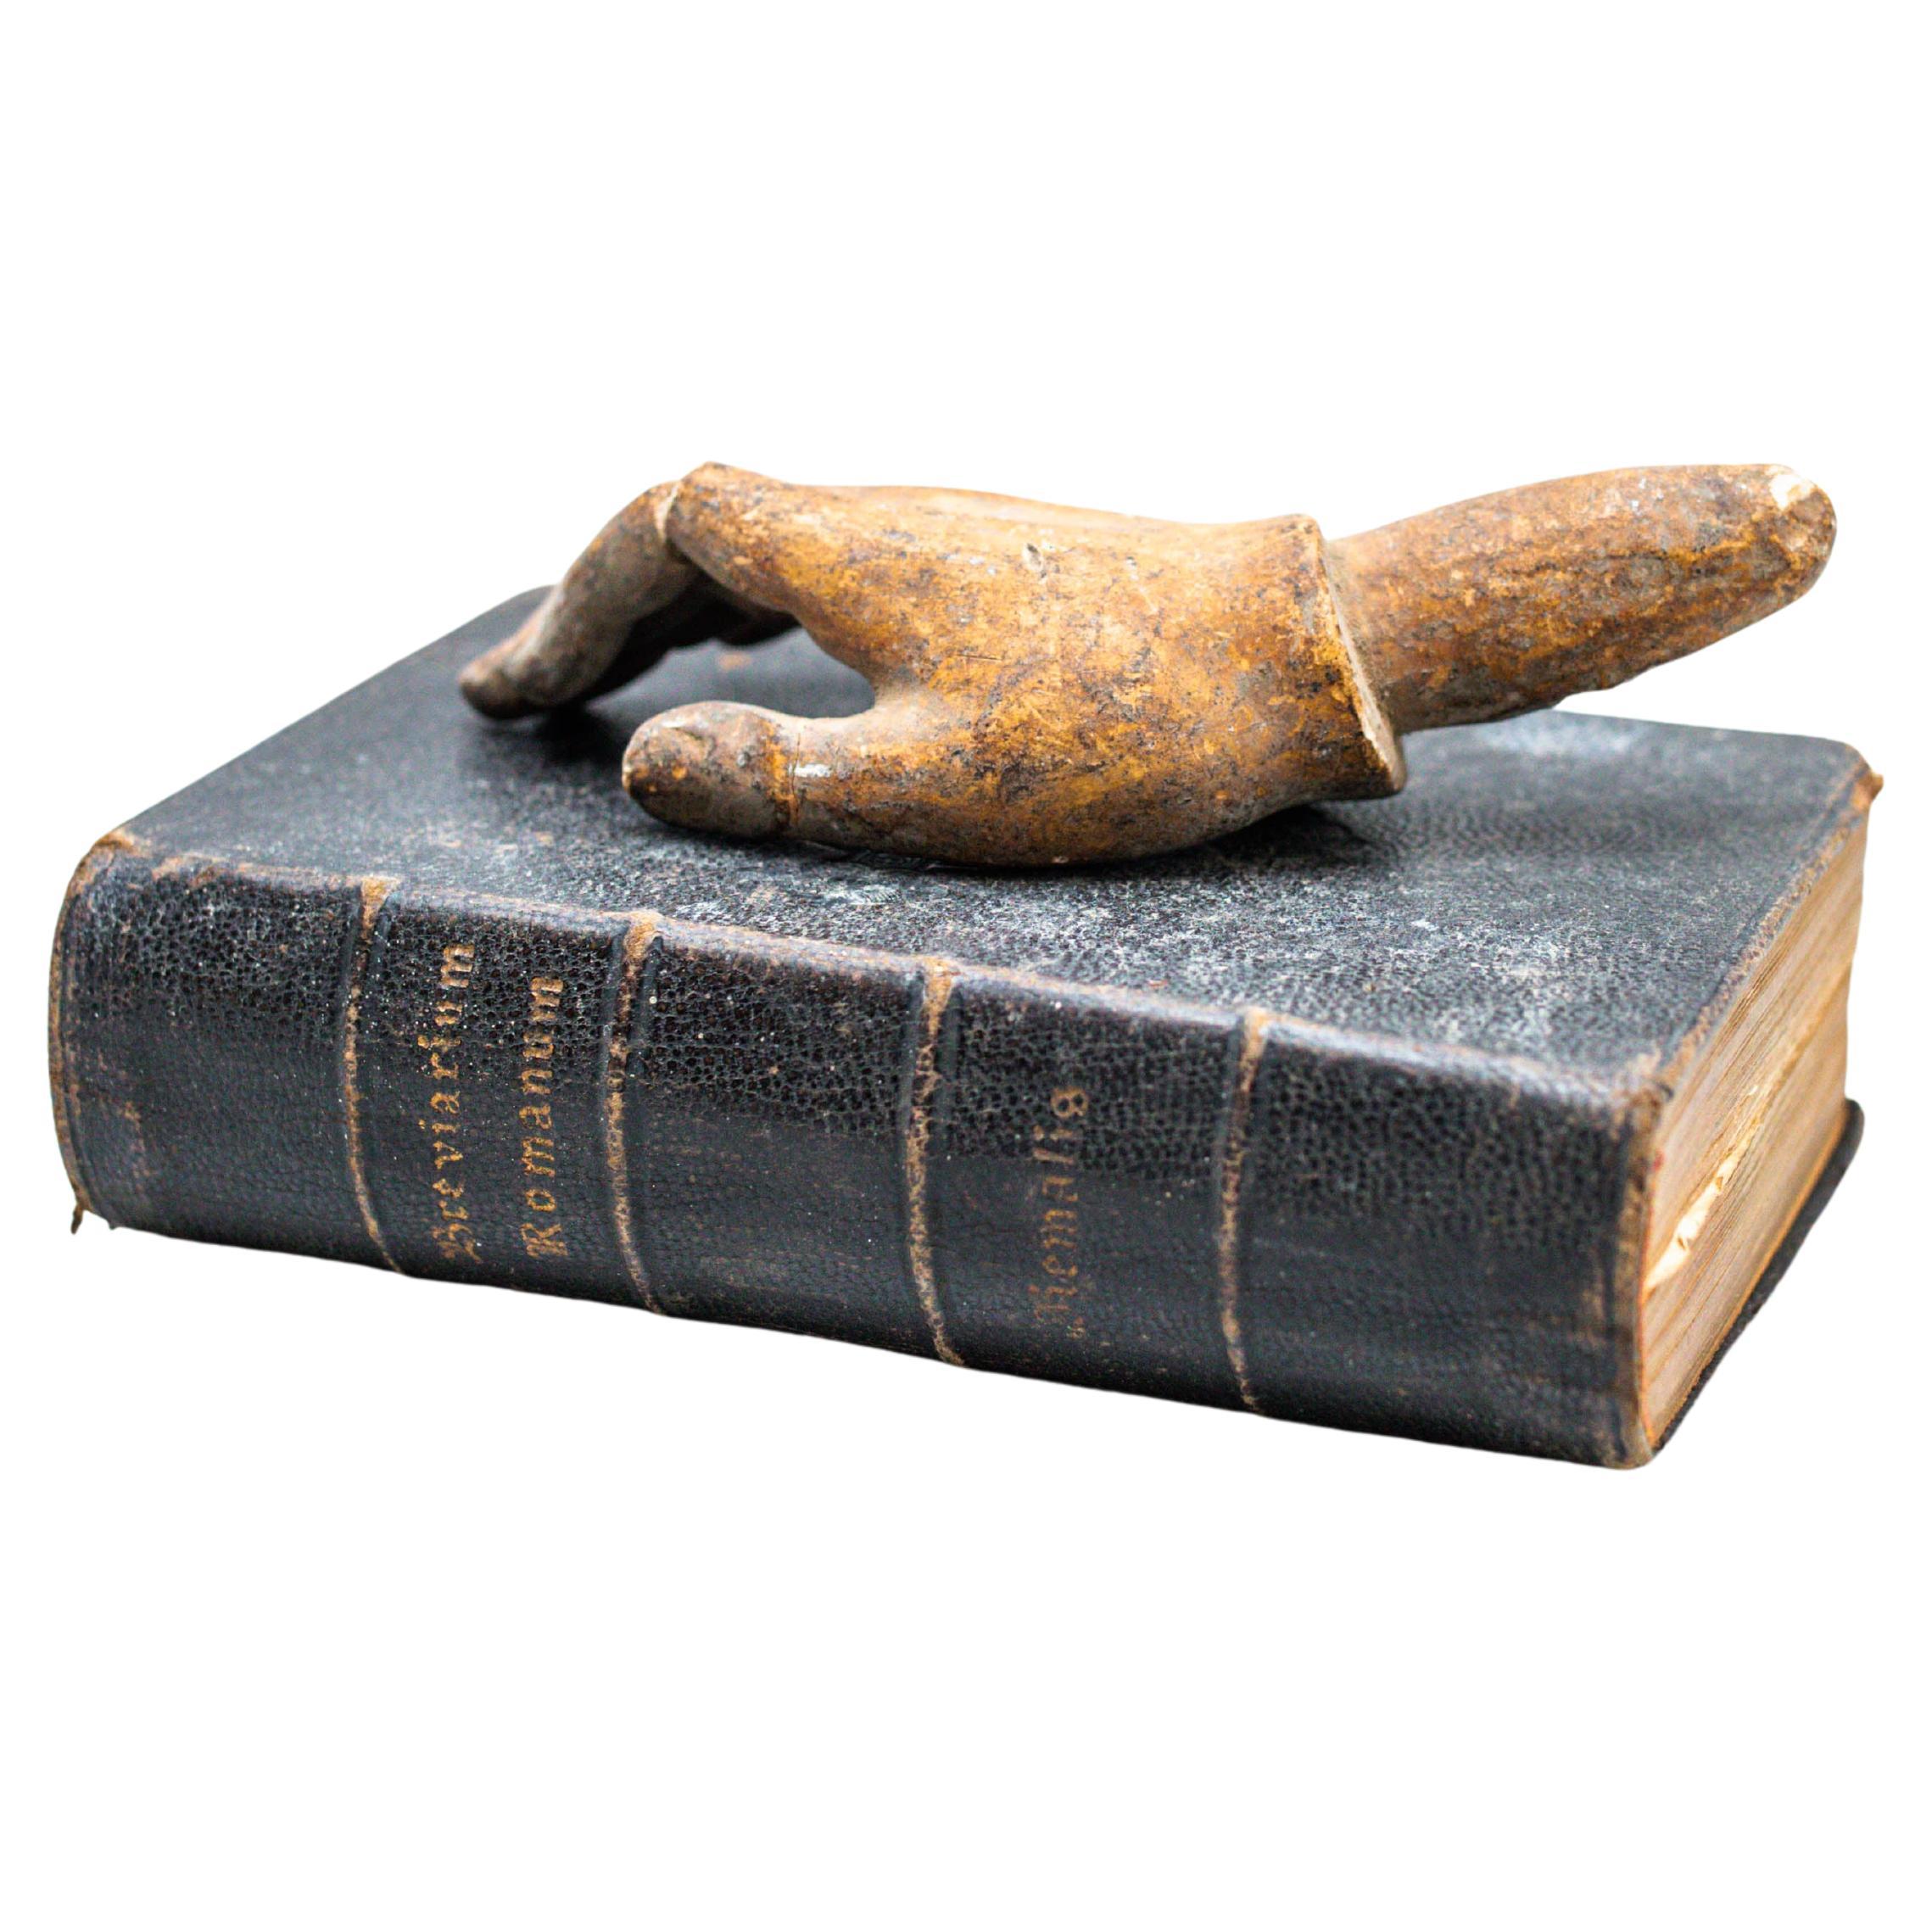 Artwork With Old Book and Mysterious Sculpture Hand, Circa 1990 